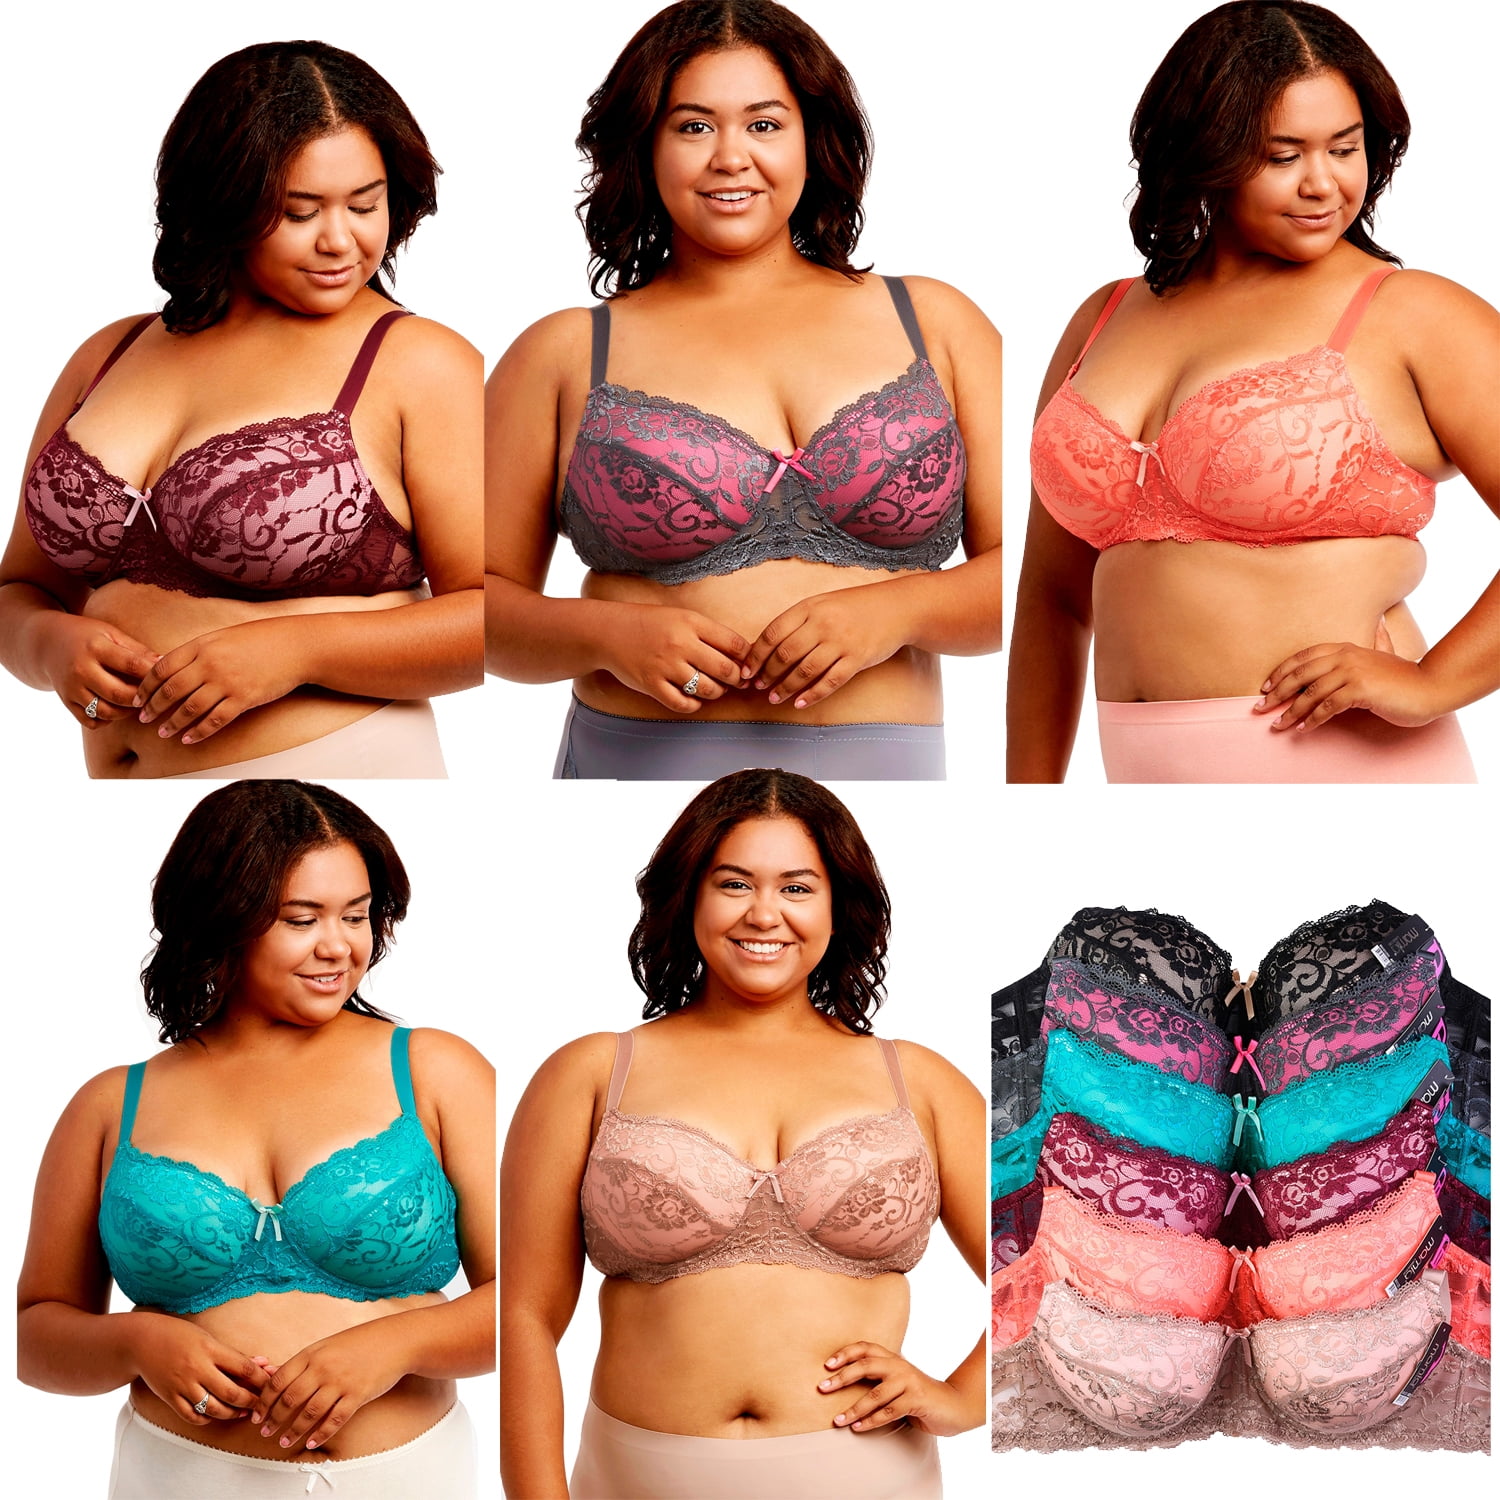 Mamia Ladies Full Cup Lace DD Cup Bra, 3 Hooks - 6 Bras Bundle Deal 